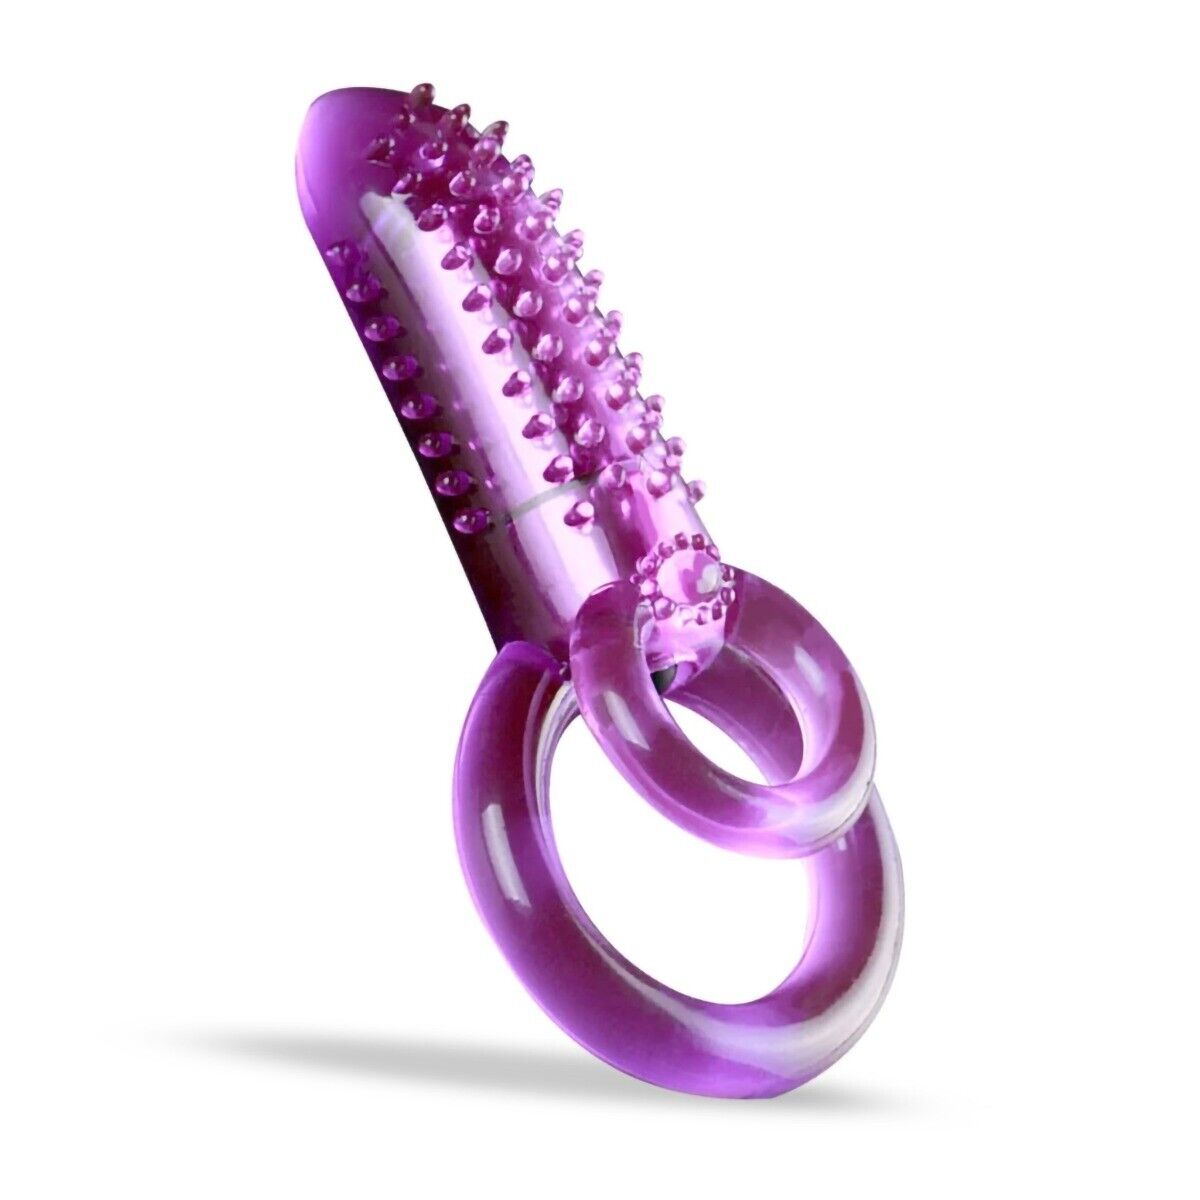 Wireless Vibrating Lover's Penis Cock Ring Clit Vibe Sex-toys for Men Couples